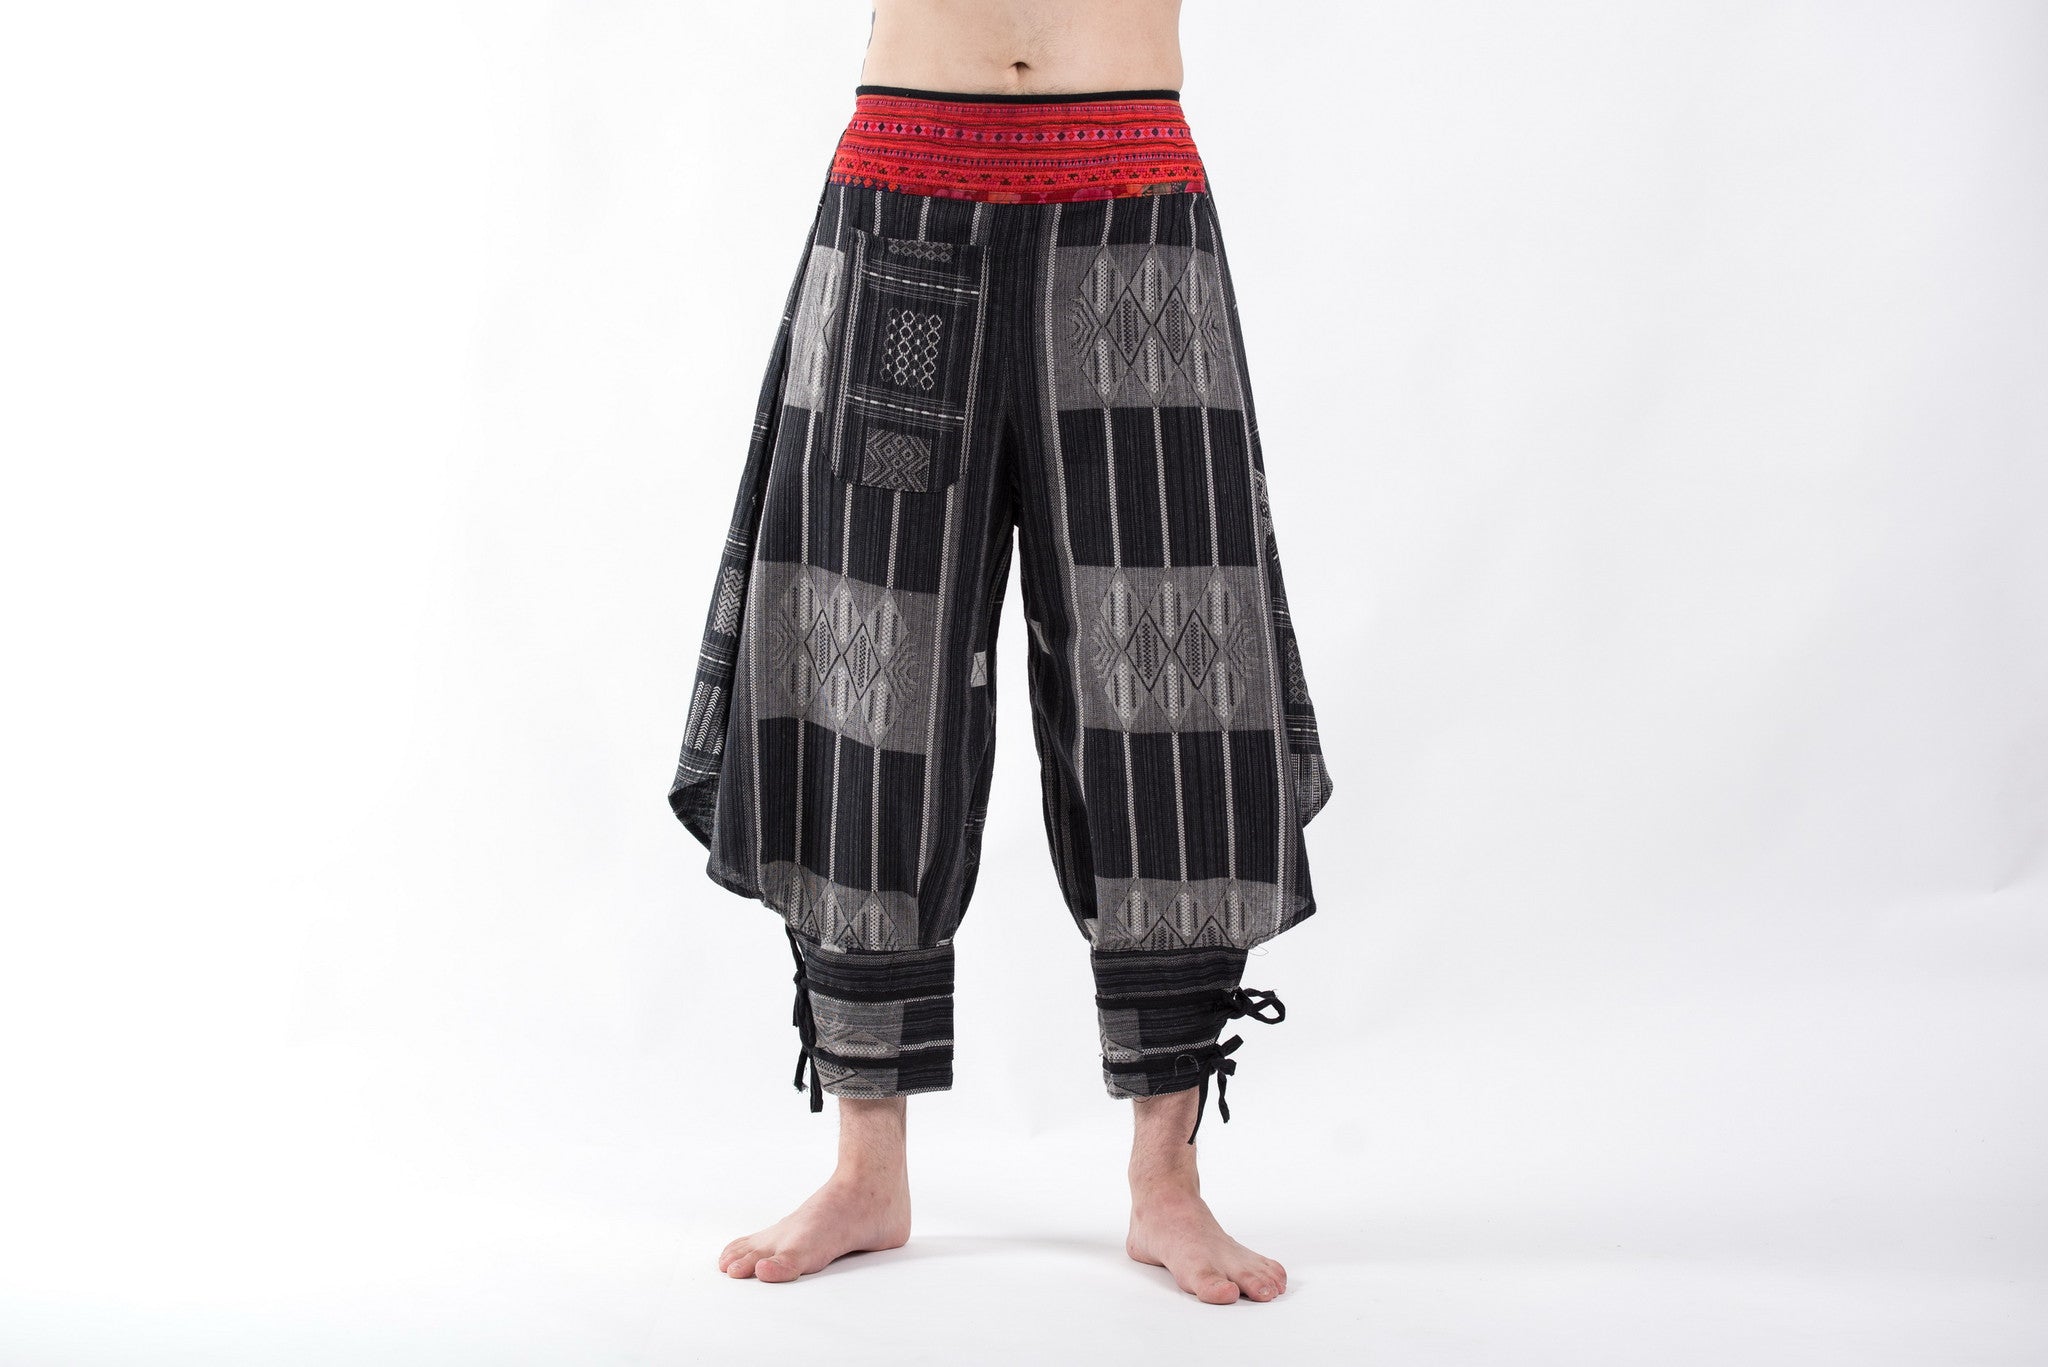 Thai Hill Tribe Fabric Men's Harem Pants with Ankle Straps in Charcoal